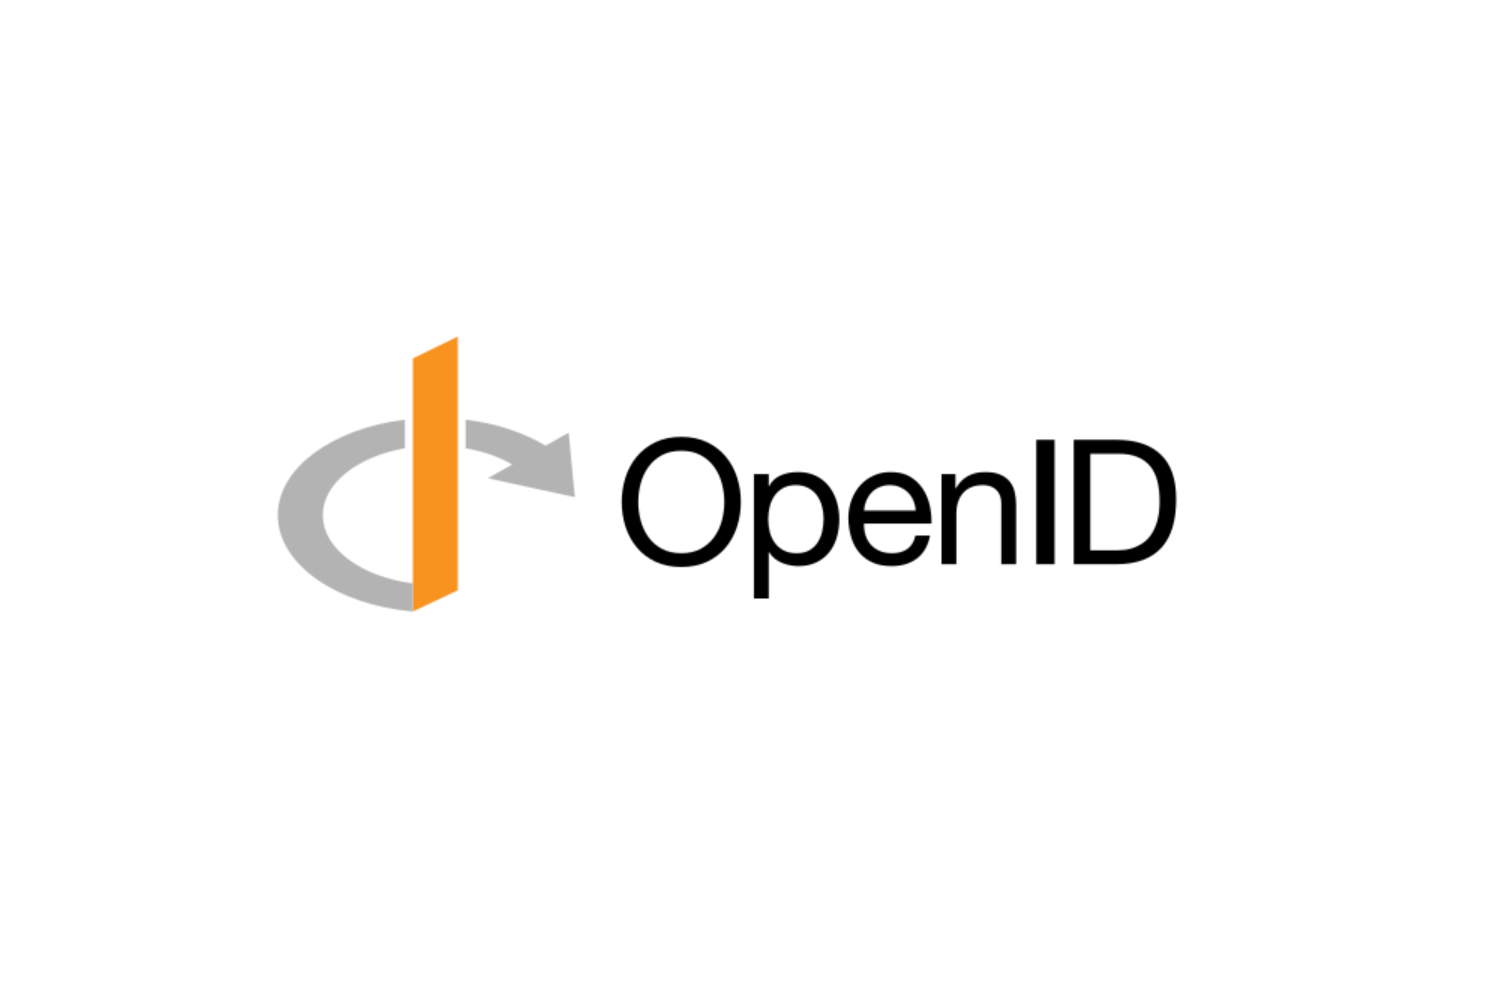 OpenID와 OAuth2.0